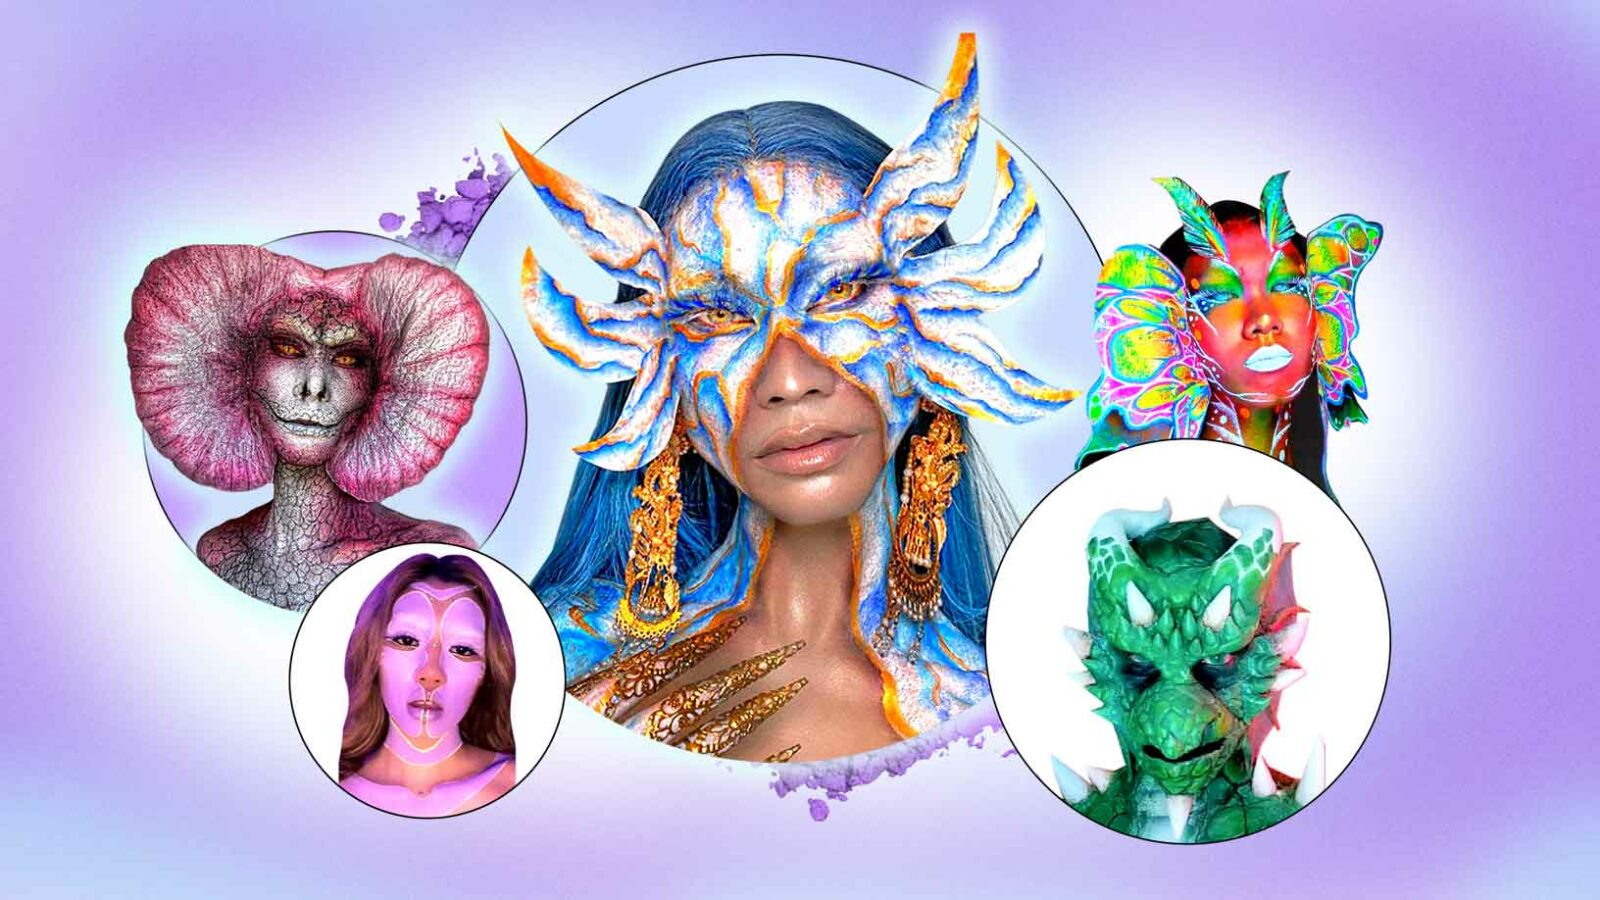 WE CANNOT GET OVER HOW CRAZY COOL THESE WILD MAKEUP TRANSFORMATIONS ON TIKTOK ARE